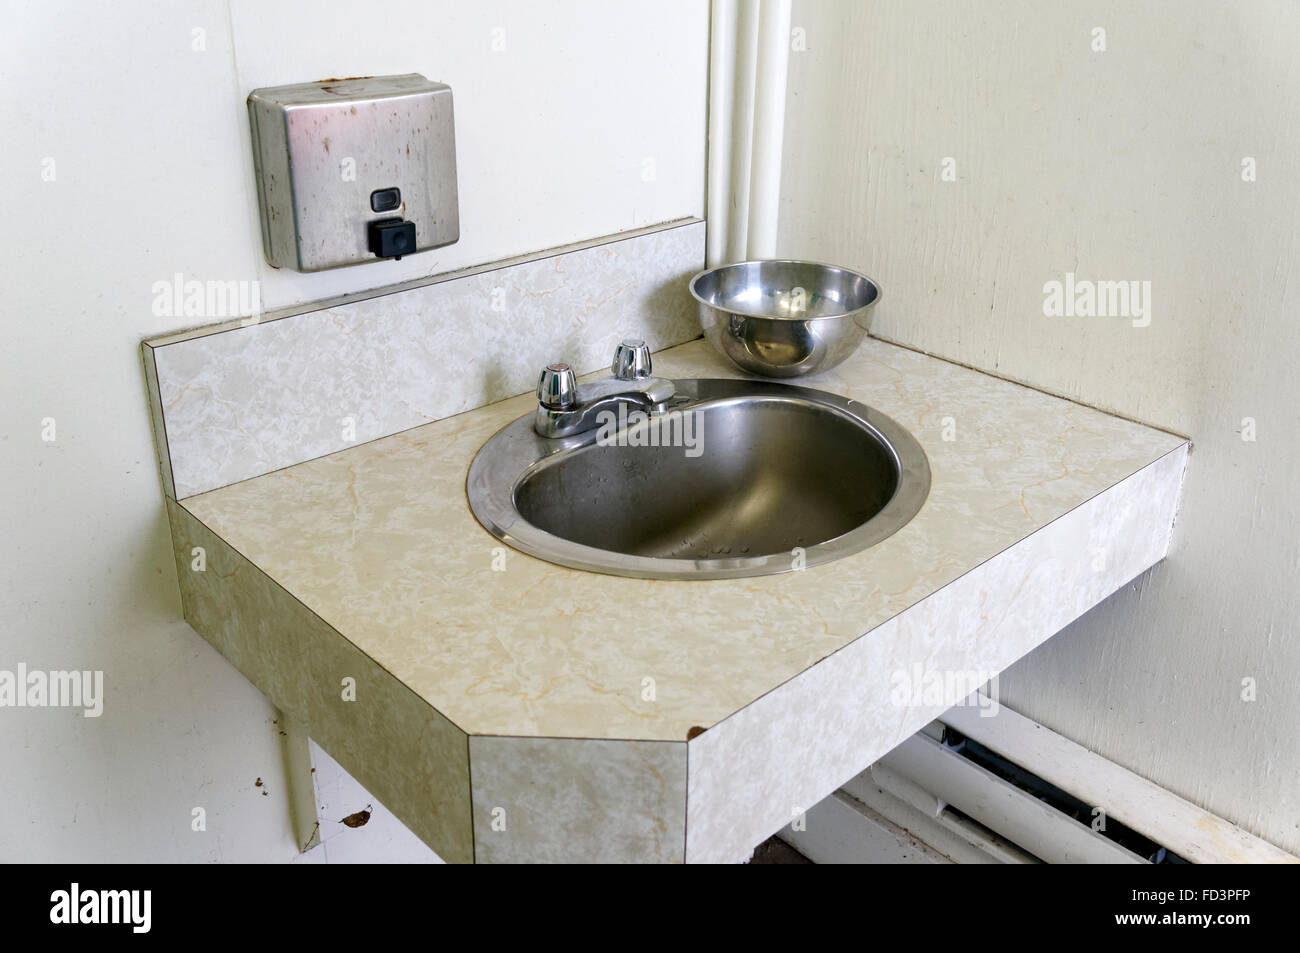 Stainless steel washbasin and soap dispenser in a public washroom Stock Photo